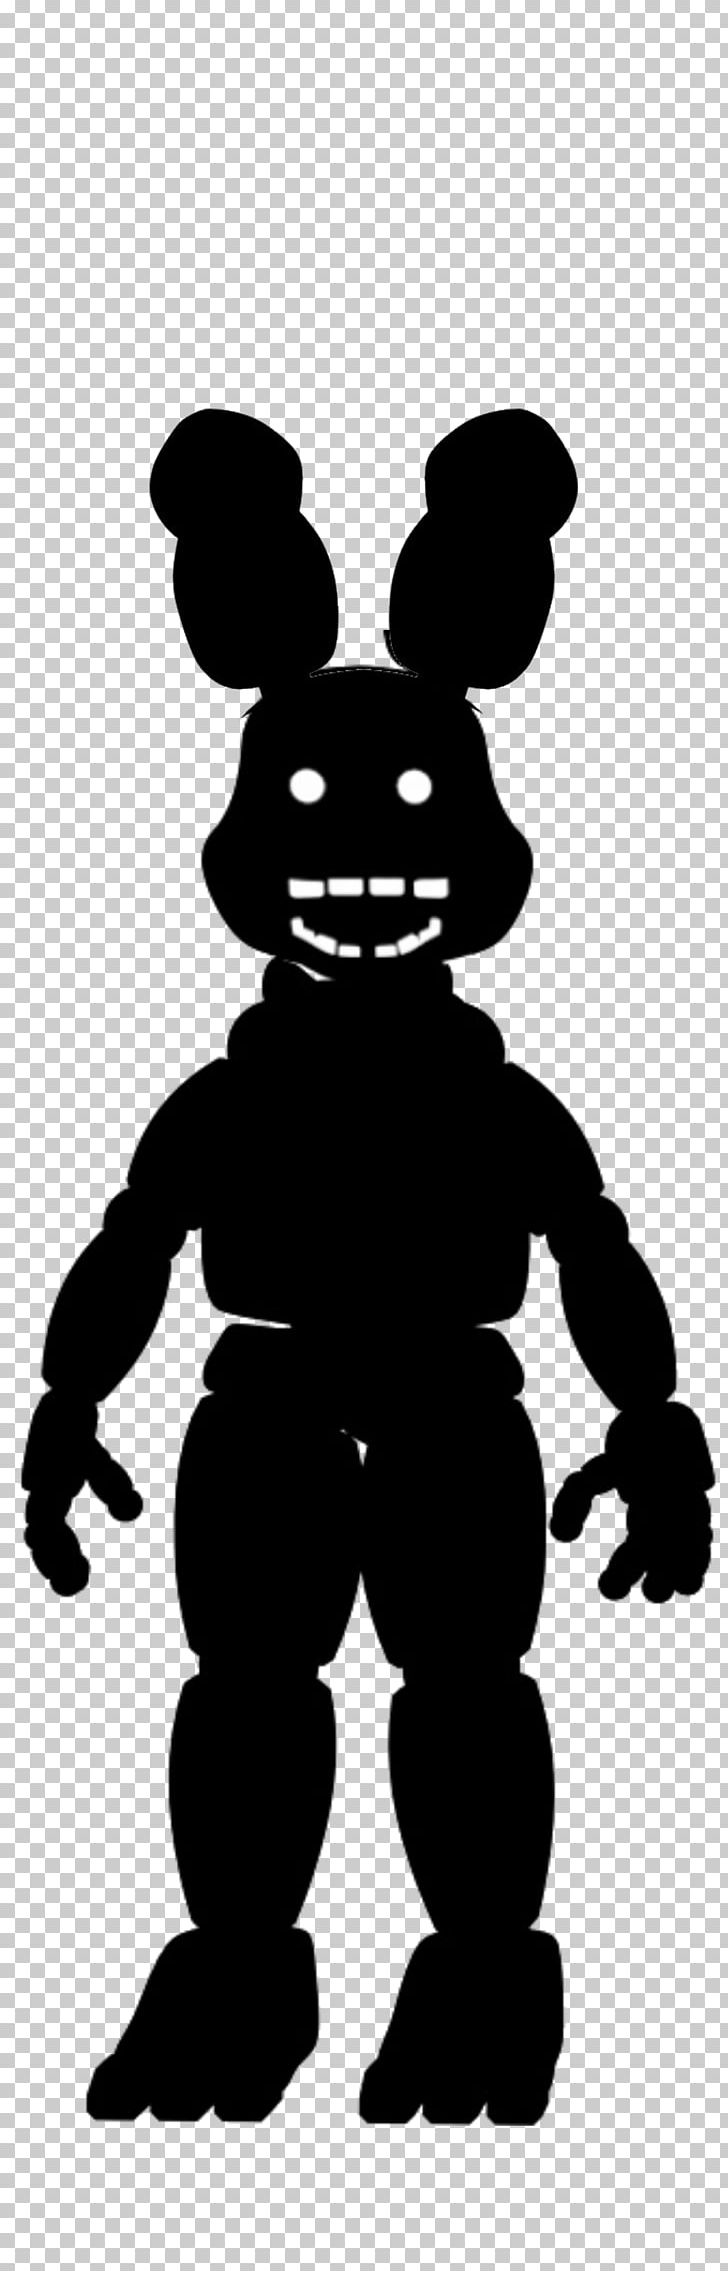 Five Nights At Freddy's 2 Five Nights At Freddy's: Sister Location Five Nights At Freddy's 3 Freddy Fazbear's Pizzeria Simulator PNG, Clipart, Animatronics, Fnaf, Freddy Fazbear, Pizzeria, Shadow Free PNG Download